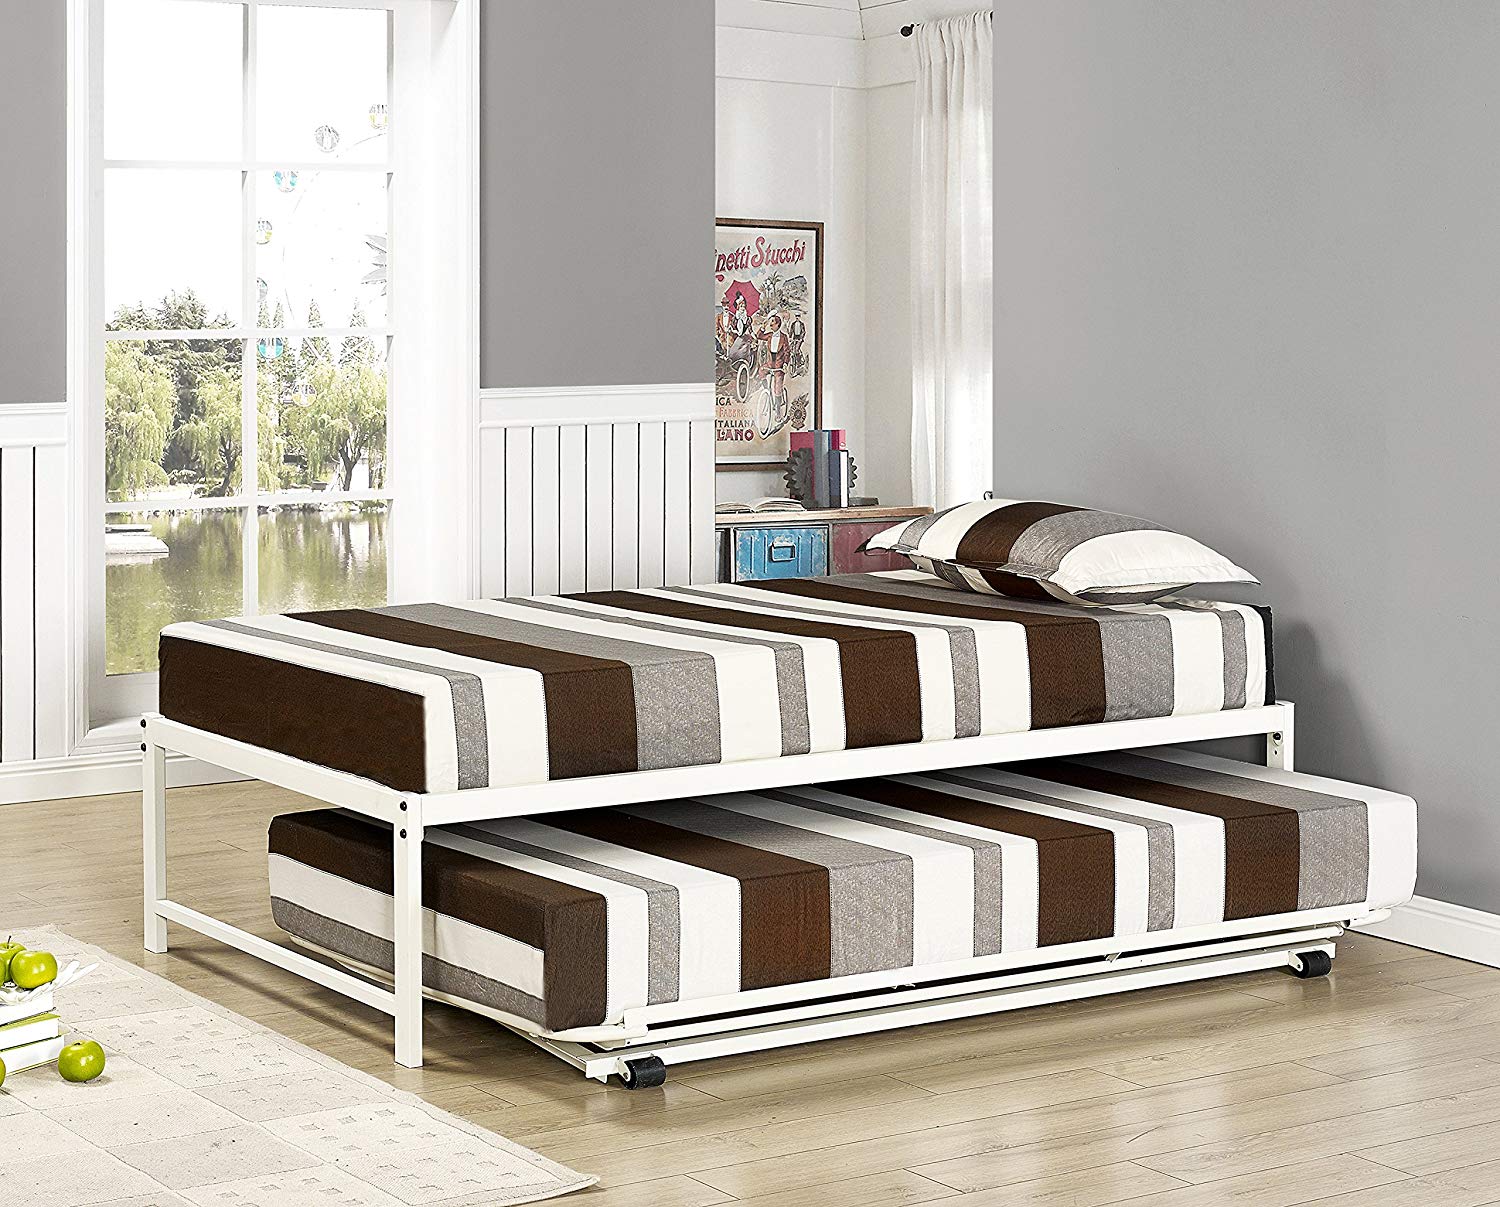 twin size mattress for trundle bed